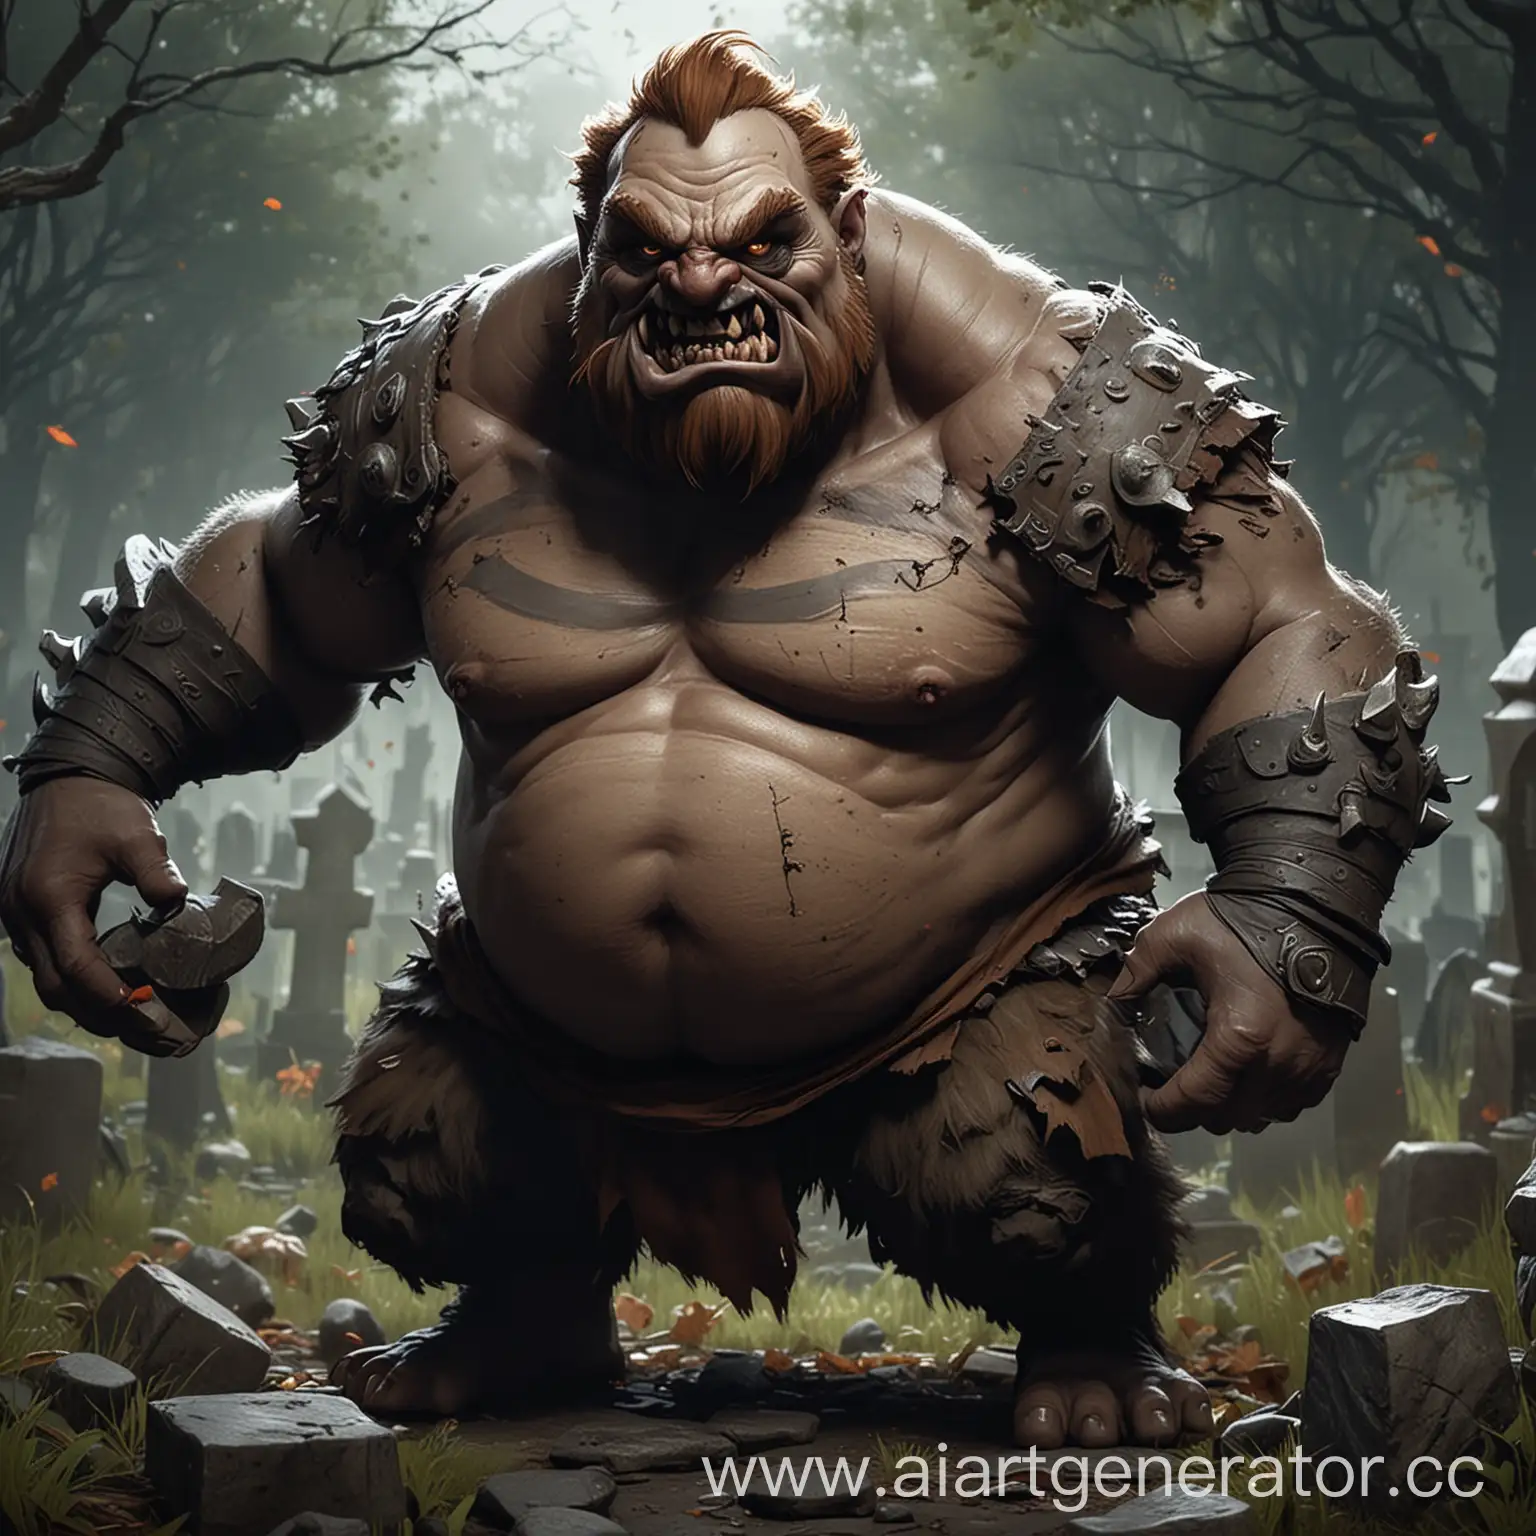 Monstrous-Character-Pudgy-with-Hook-in-Dark-Cemetery